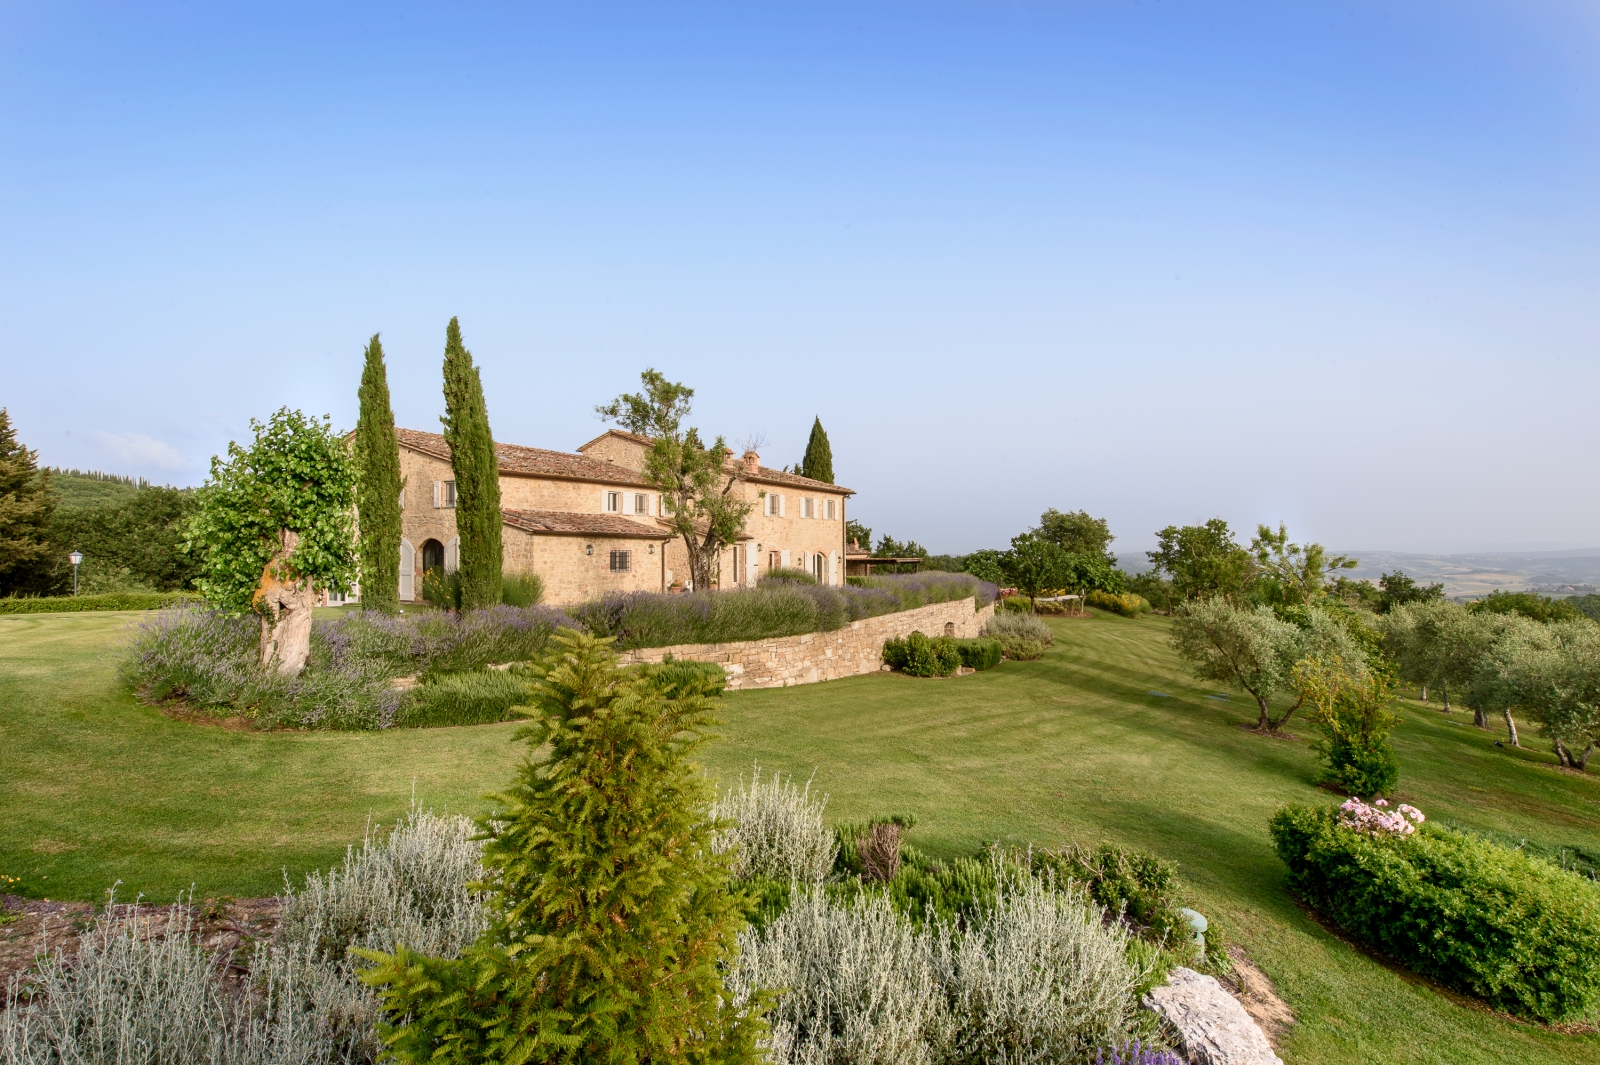 Exterior view of villa, gardens and countryside view at Tramonti in Tuscany, Italy